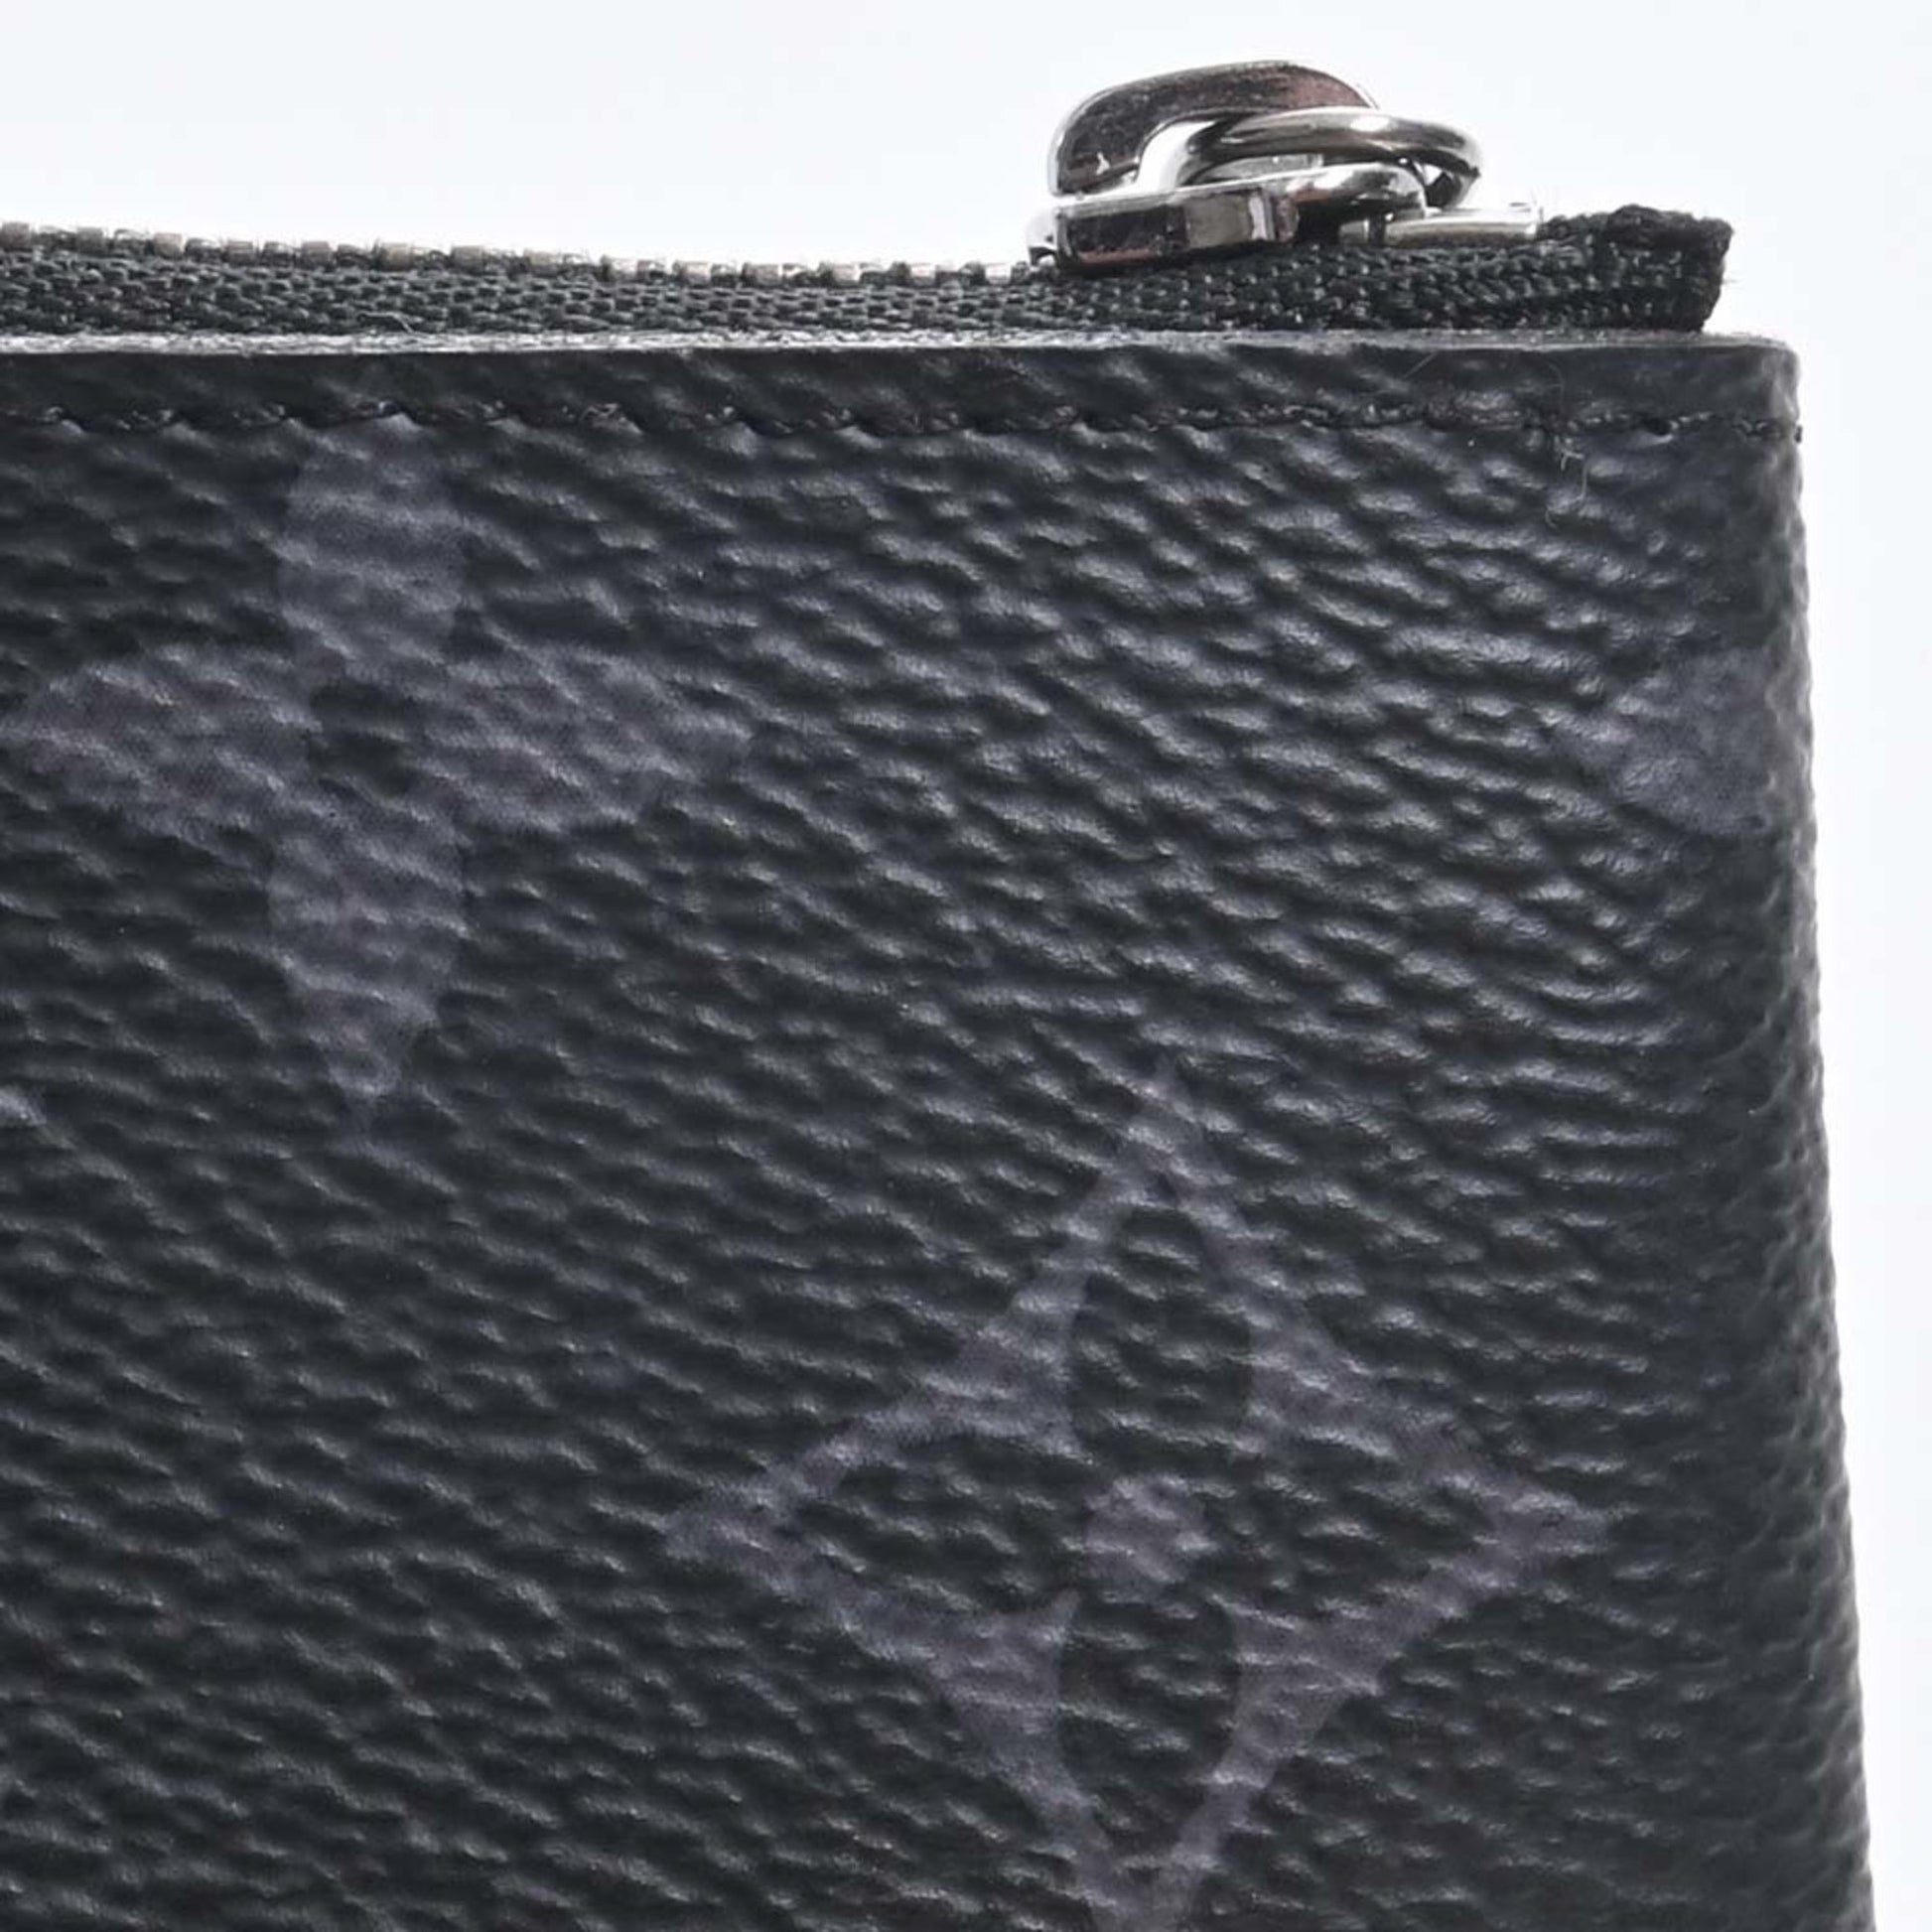 Key Pouch Monogram Eclipse - Wallets and Small Leather Goods M80905